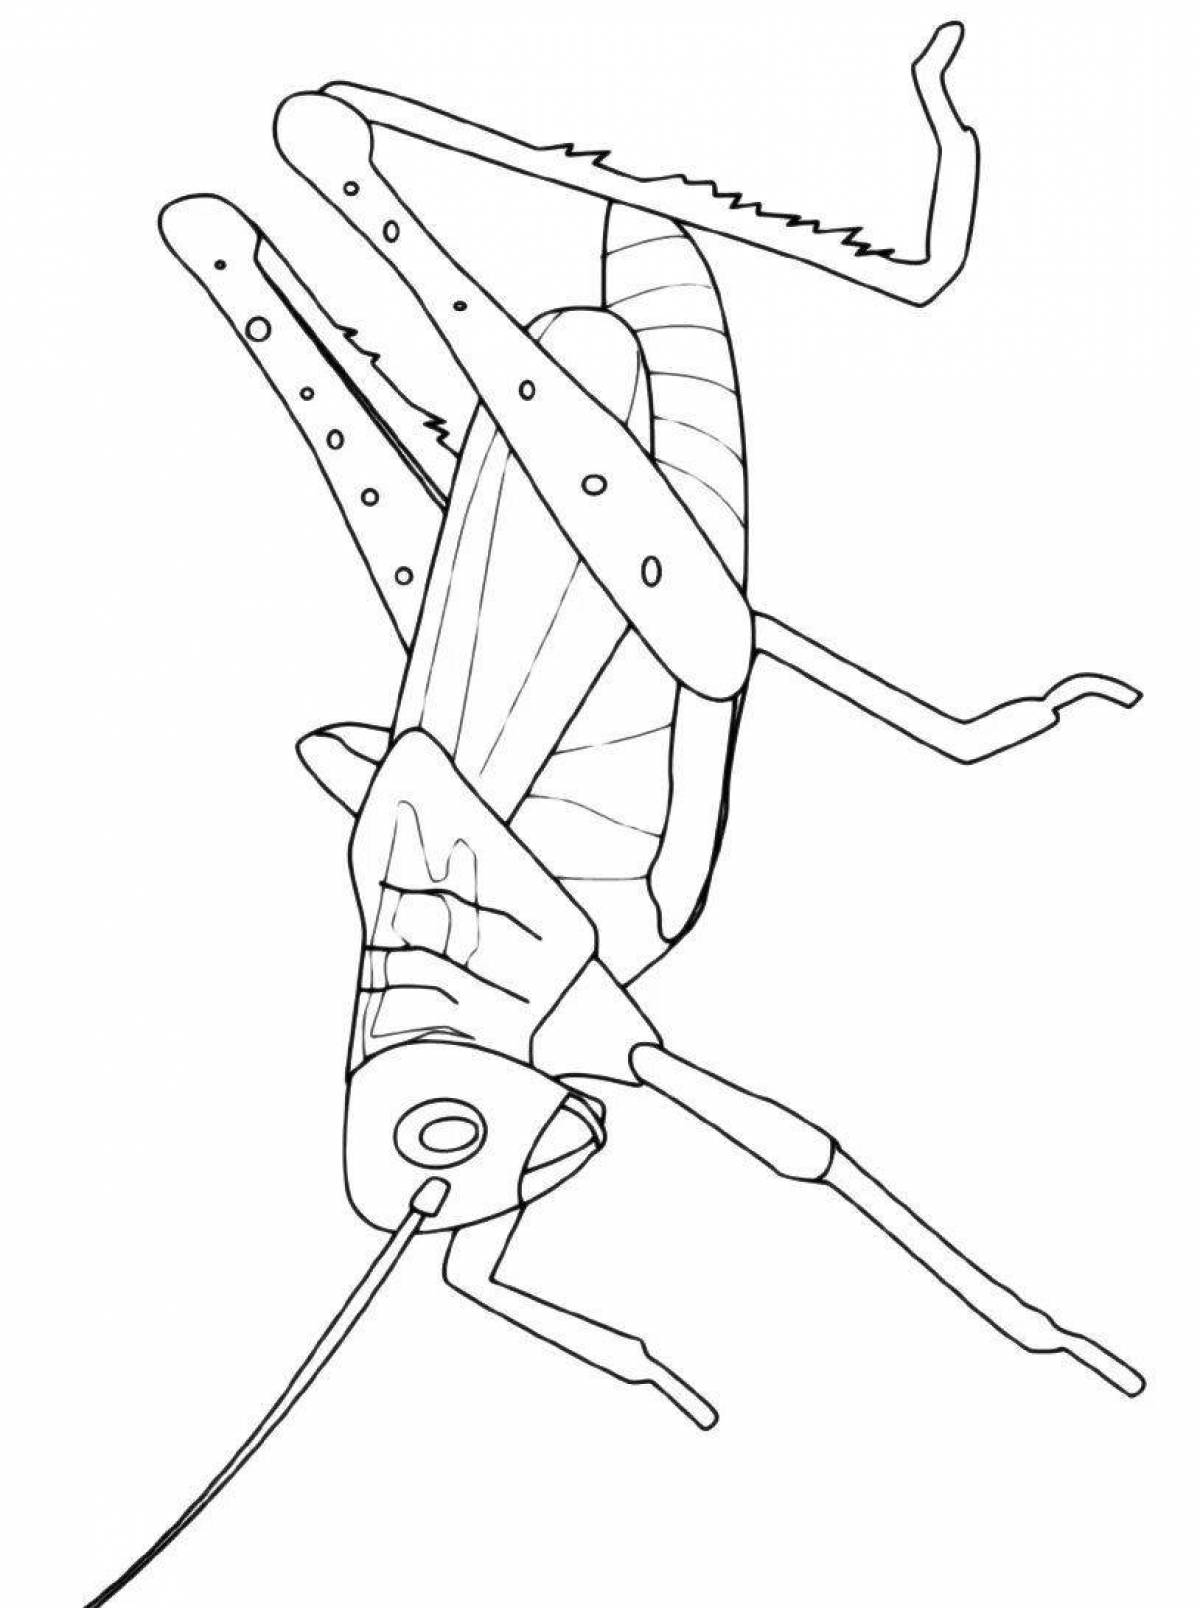 Amazing cricket coloring page